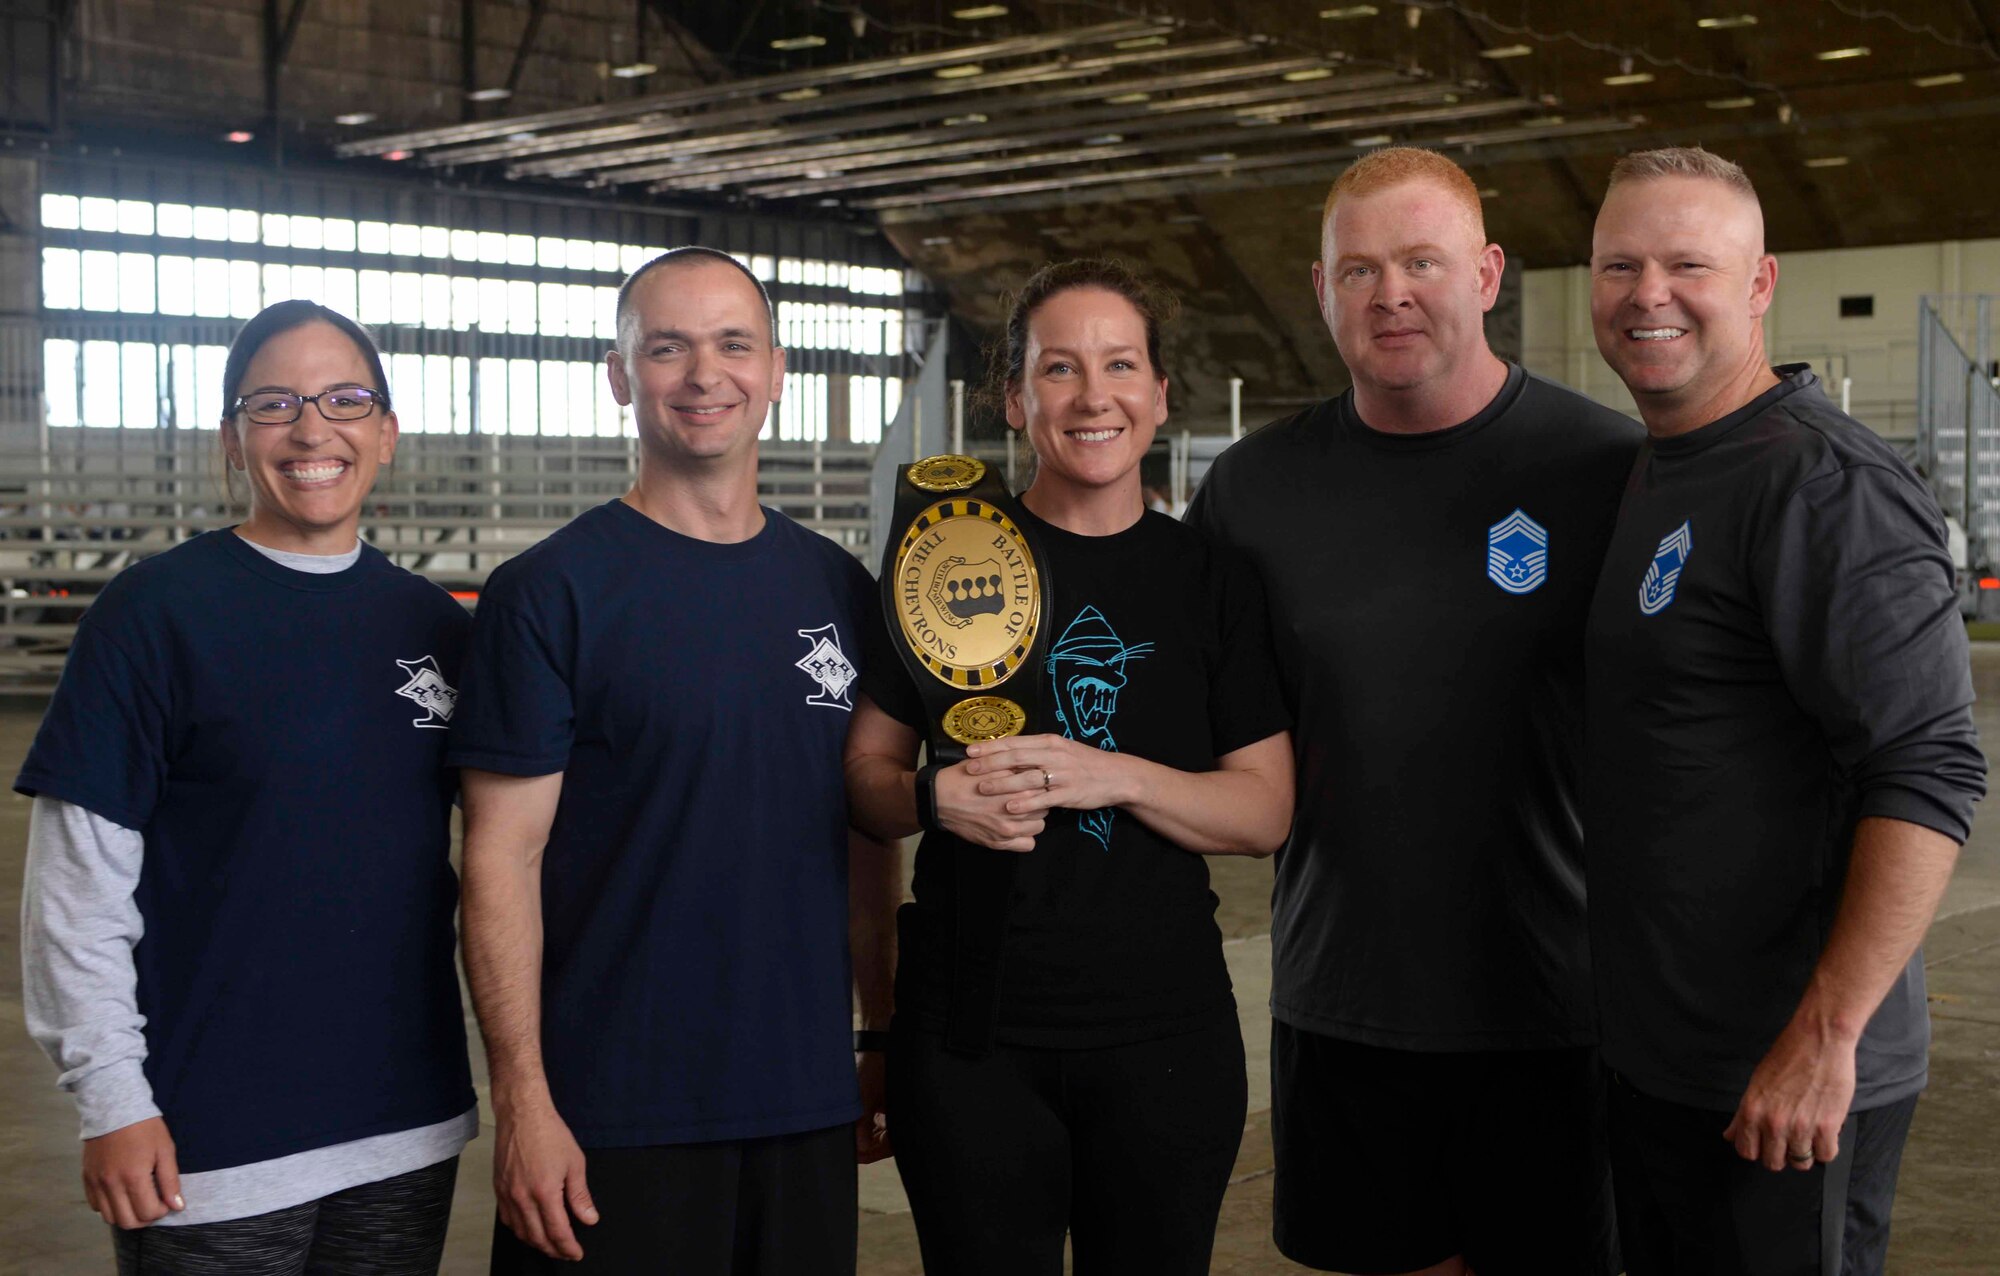 Team five of the Battle of the Chevrons pose with their champion belt at Ellsworth Air Force Base, S.D., May 25, 2016. The competition is a team building exercise that included 10 stations to test Airmen mentally or physically. (U.S. Air Force photo by Airman 1st Class Sadie Colbert/Released)